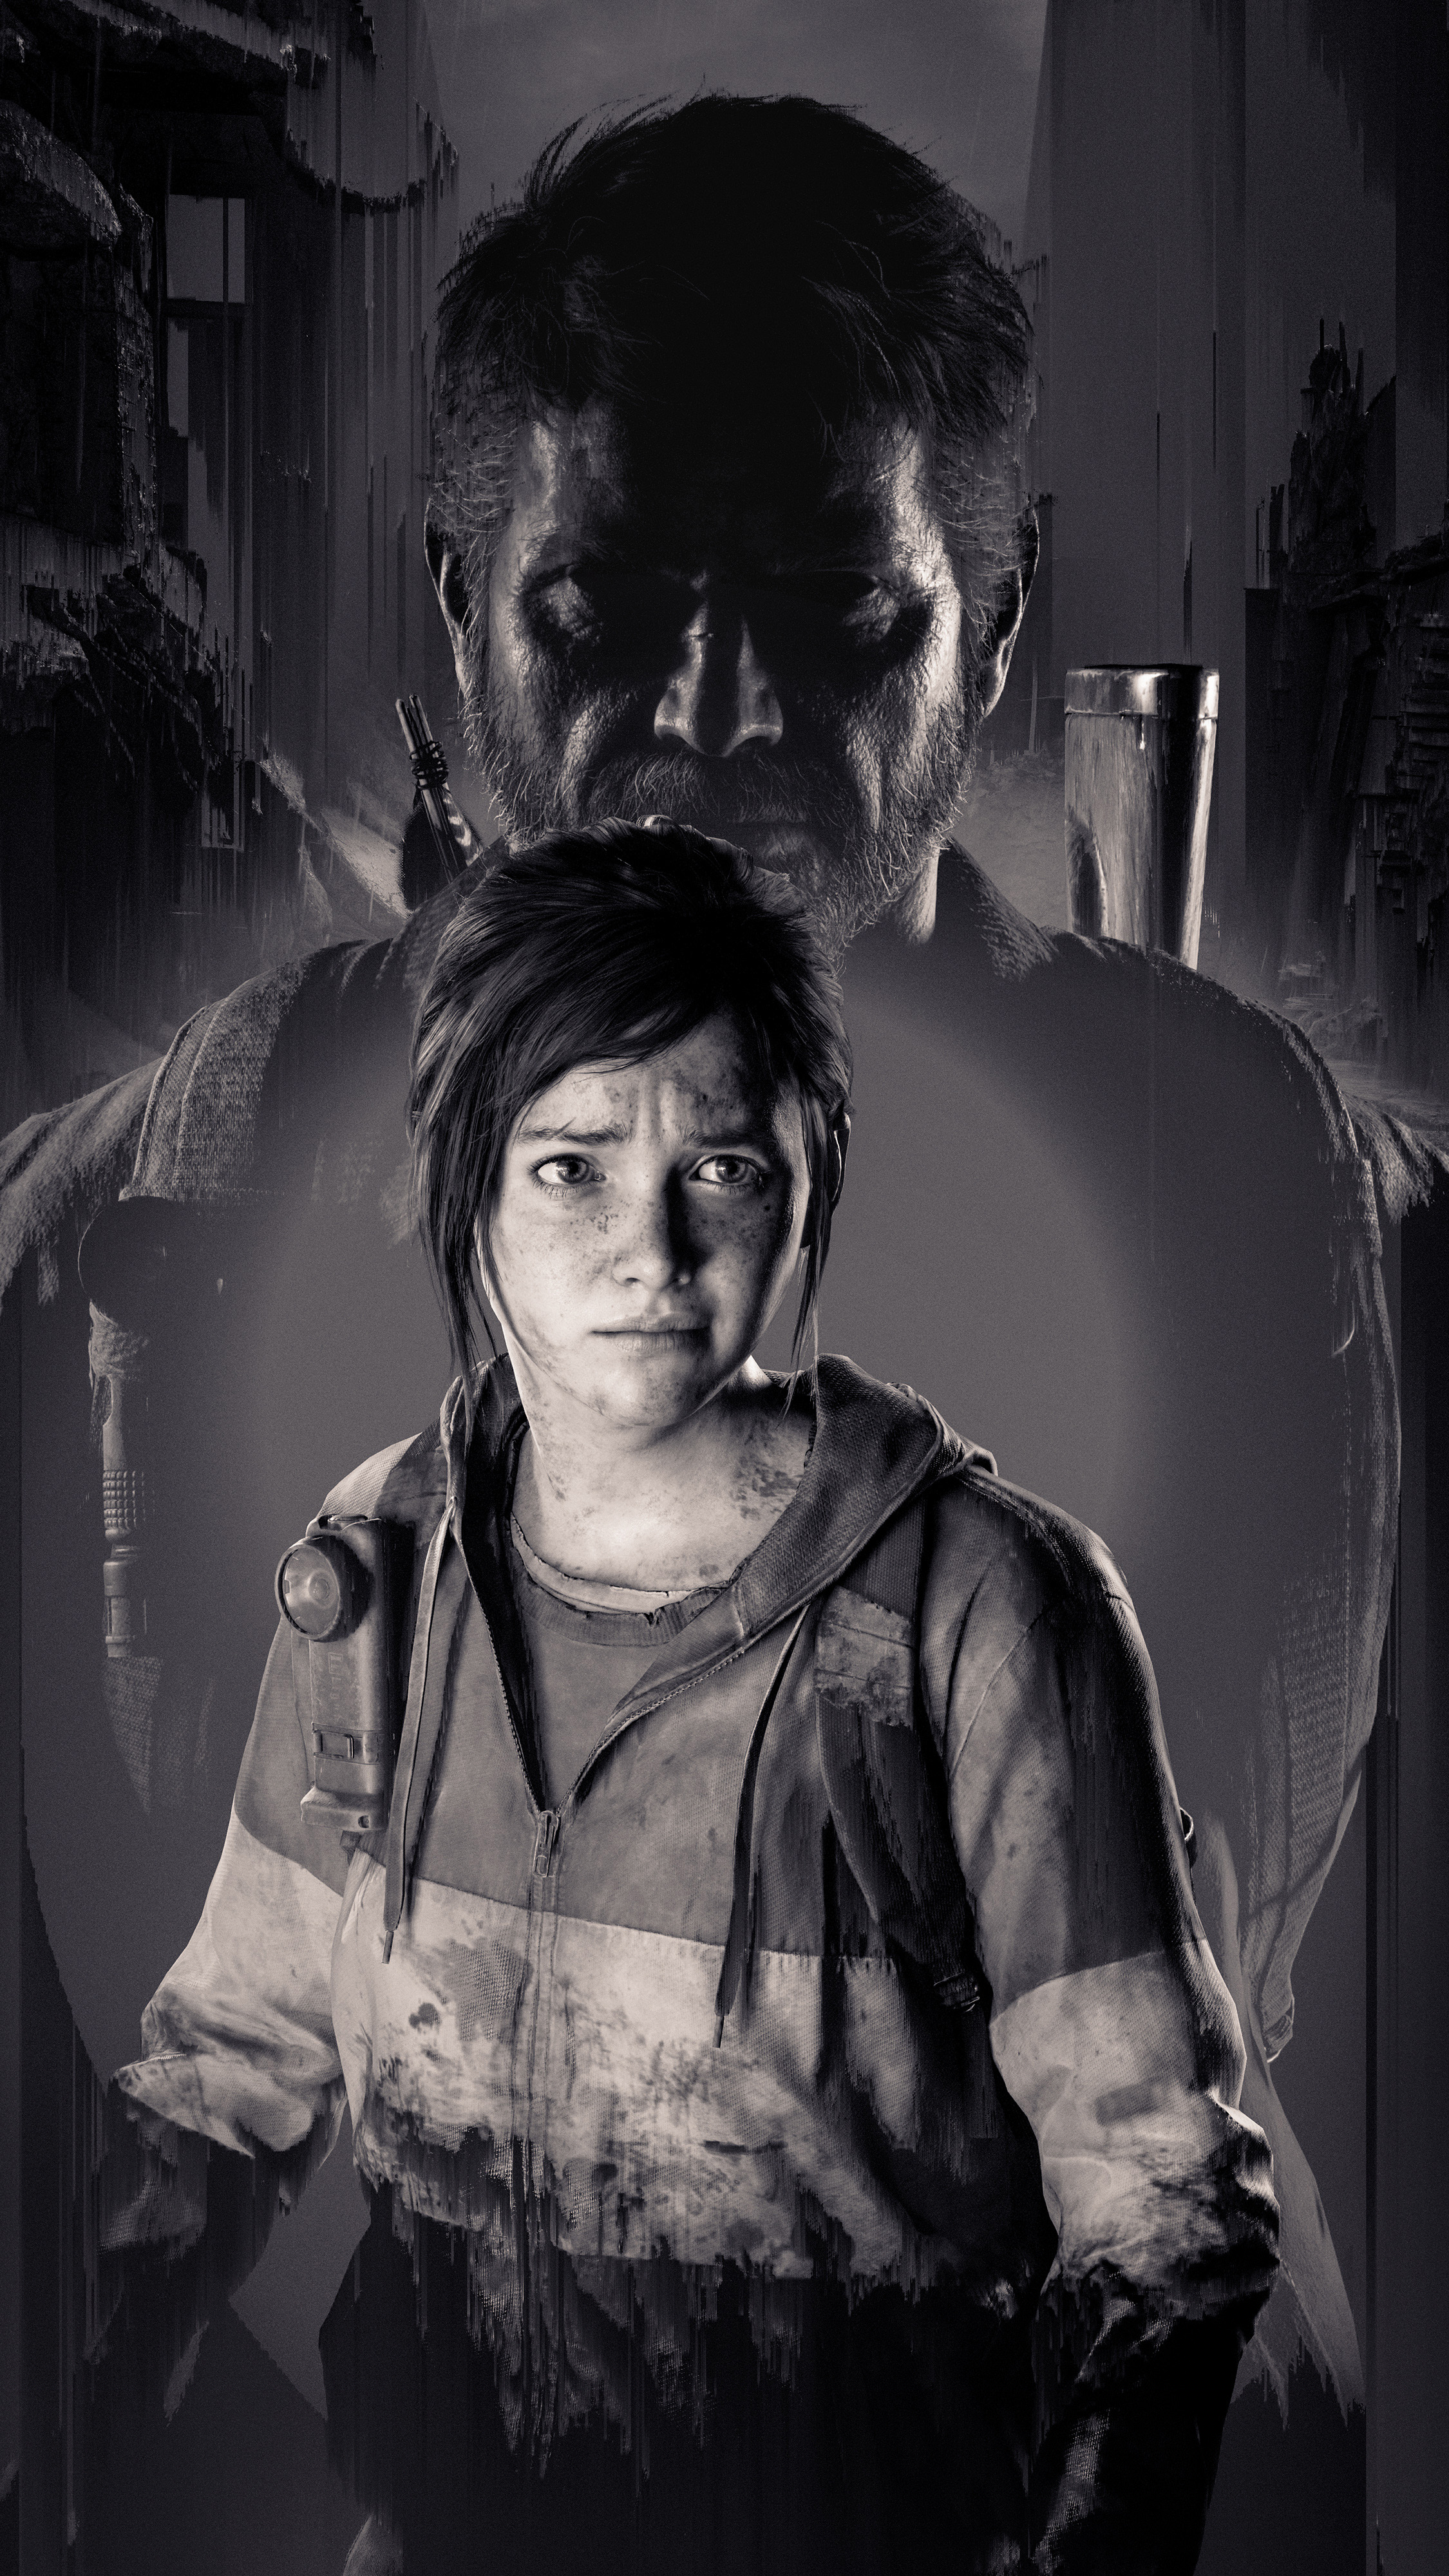 The Last of Us: Part 2 wallpapers or desktop backgrounds